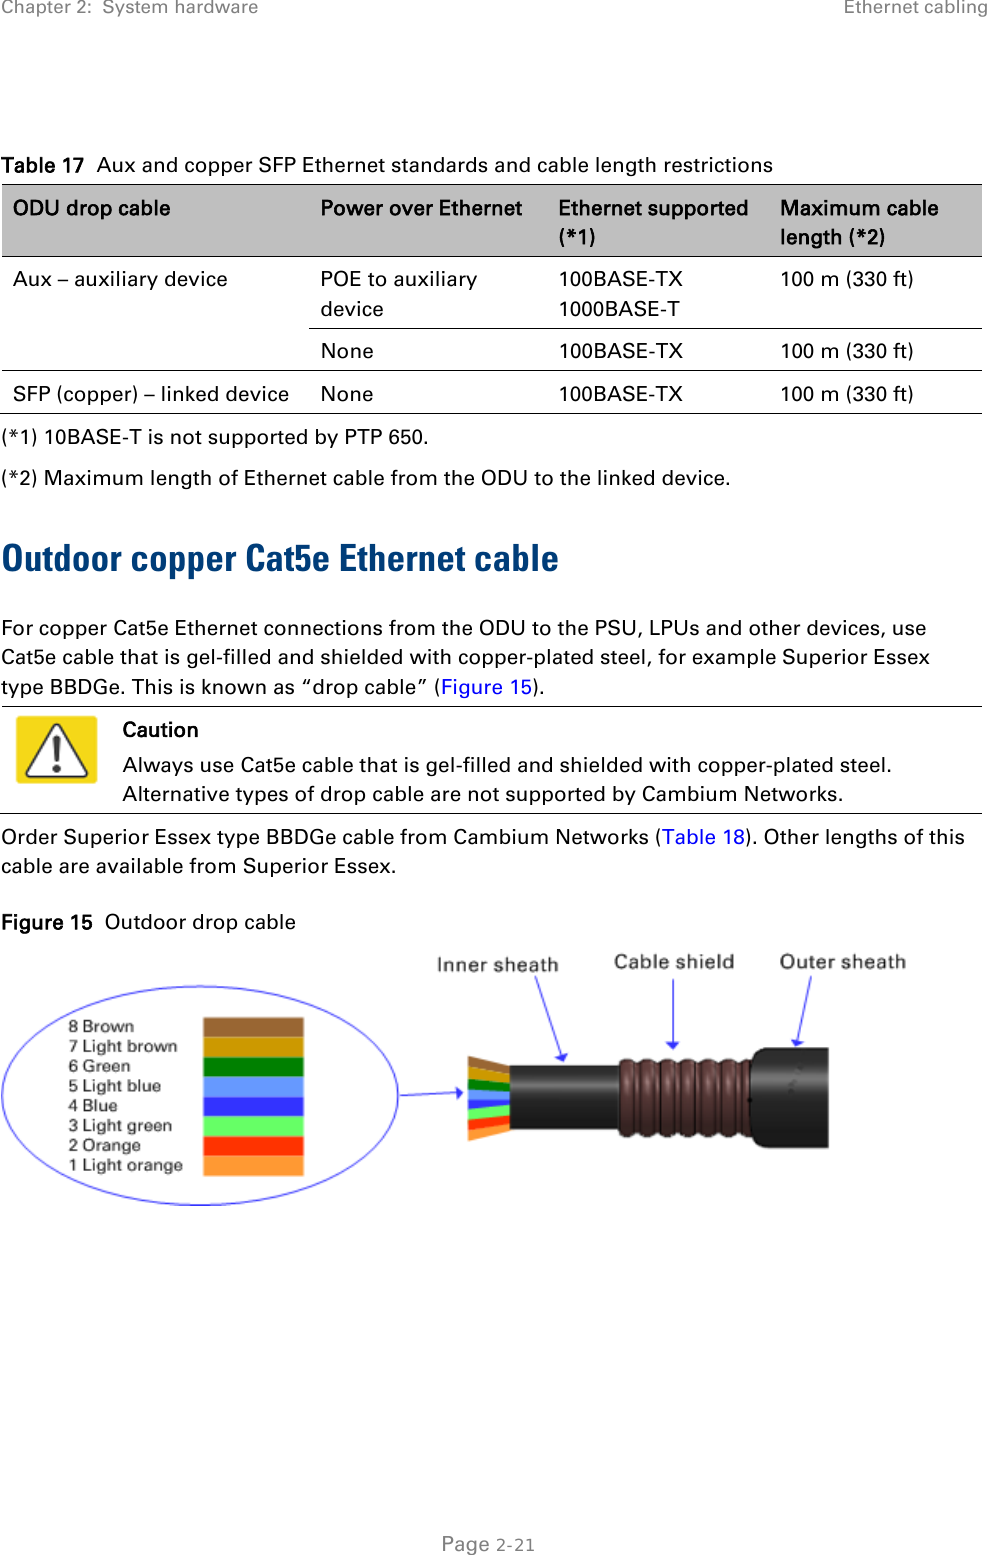 Chapter 2:  System hardware Ethernet cabling   Table 17  Aux and copper SFP Ethernet standards and cable length restrictions ODU drop cable Power over Ethernet Ethernet supported (*1) Maximum cable length (*2) Aux – auxiliary device  POE to auxiliary device 100BASE-TX 1000BASE-T 100 m (330 ft) None 100BASE-TX 100 m (330 ft) SFP (copper) – linked device None 100BASE-TX 100 m (330 ft) (*1) 10BASE-T is not supported by PTP 650.  (*2) Maximum length of Ethernet cable from the ODU to the linked device. Outdoor copper Cat5e Ethernet cable For copper Cat5e Ethernet connections from the ODU to the PSU, LPUs and other devices, use Cat5e cable that is gel-filled and shielded with copper-plated steel, for example Superior Essex  type BBDGe. This is known as “drop cable” (Figure 15).   Caution Always use Cat5e cable that is gel-filled and shielded with copper-plated steel. Alternative types of drop cable are not supported by Cambium Networks. Order Superior Essex type BBDGe cable from Cambium Networks (Table 18). Other lengths of this cable are available from Superior Essex. Figure 15  Outdoor drop cable   Page 2-21 